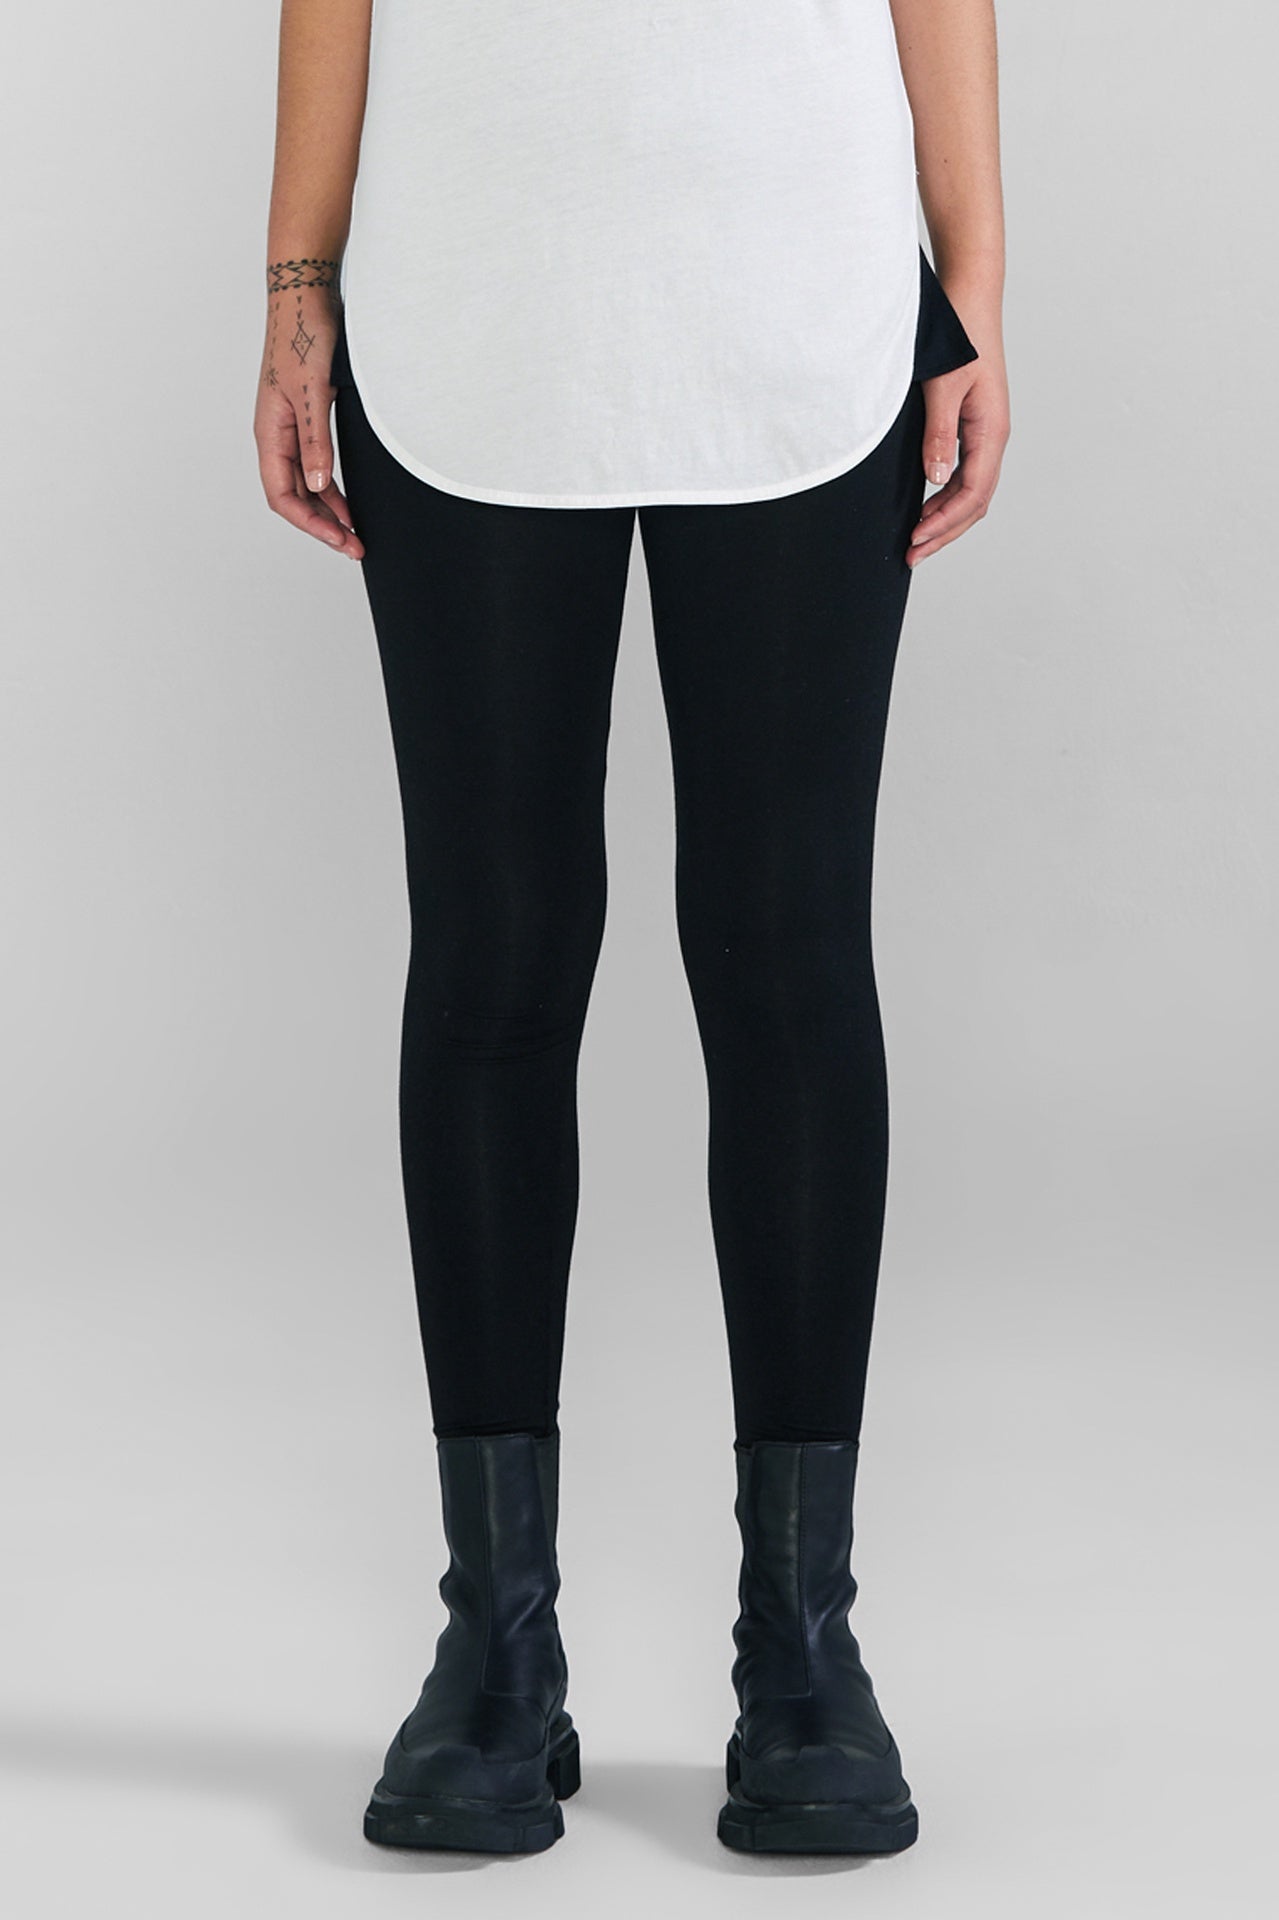 https://www.taylorboutique.co.nz/content/products/raised-intensify-leggings-closeup_Black-1.jpg?width=2500